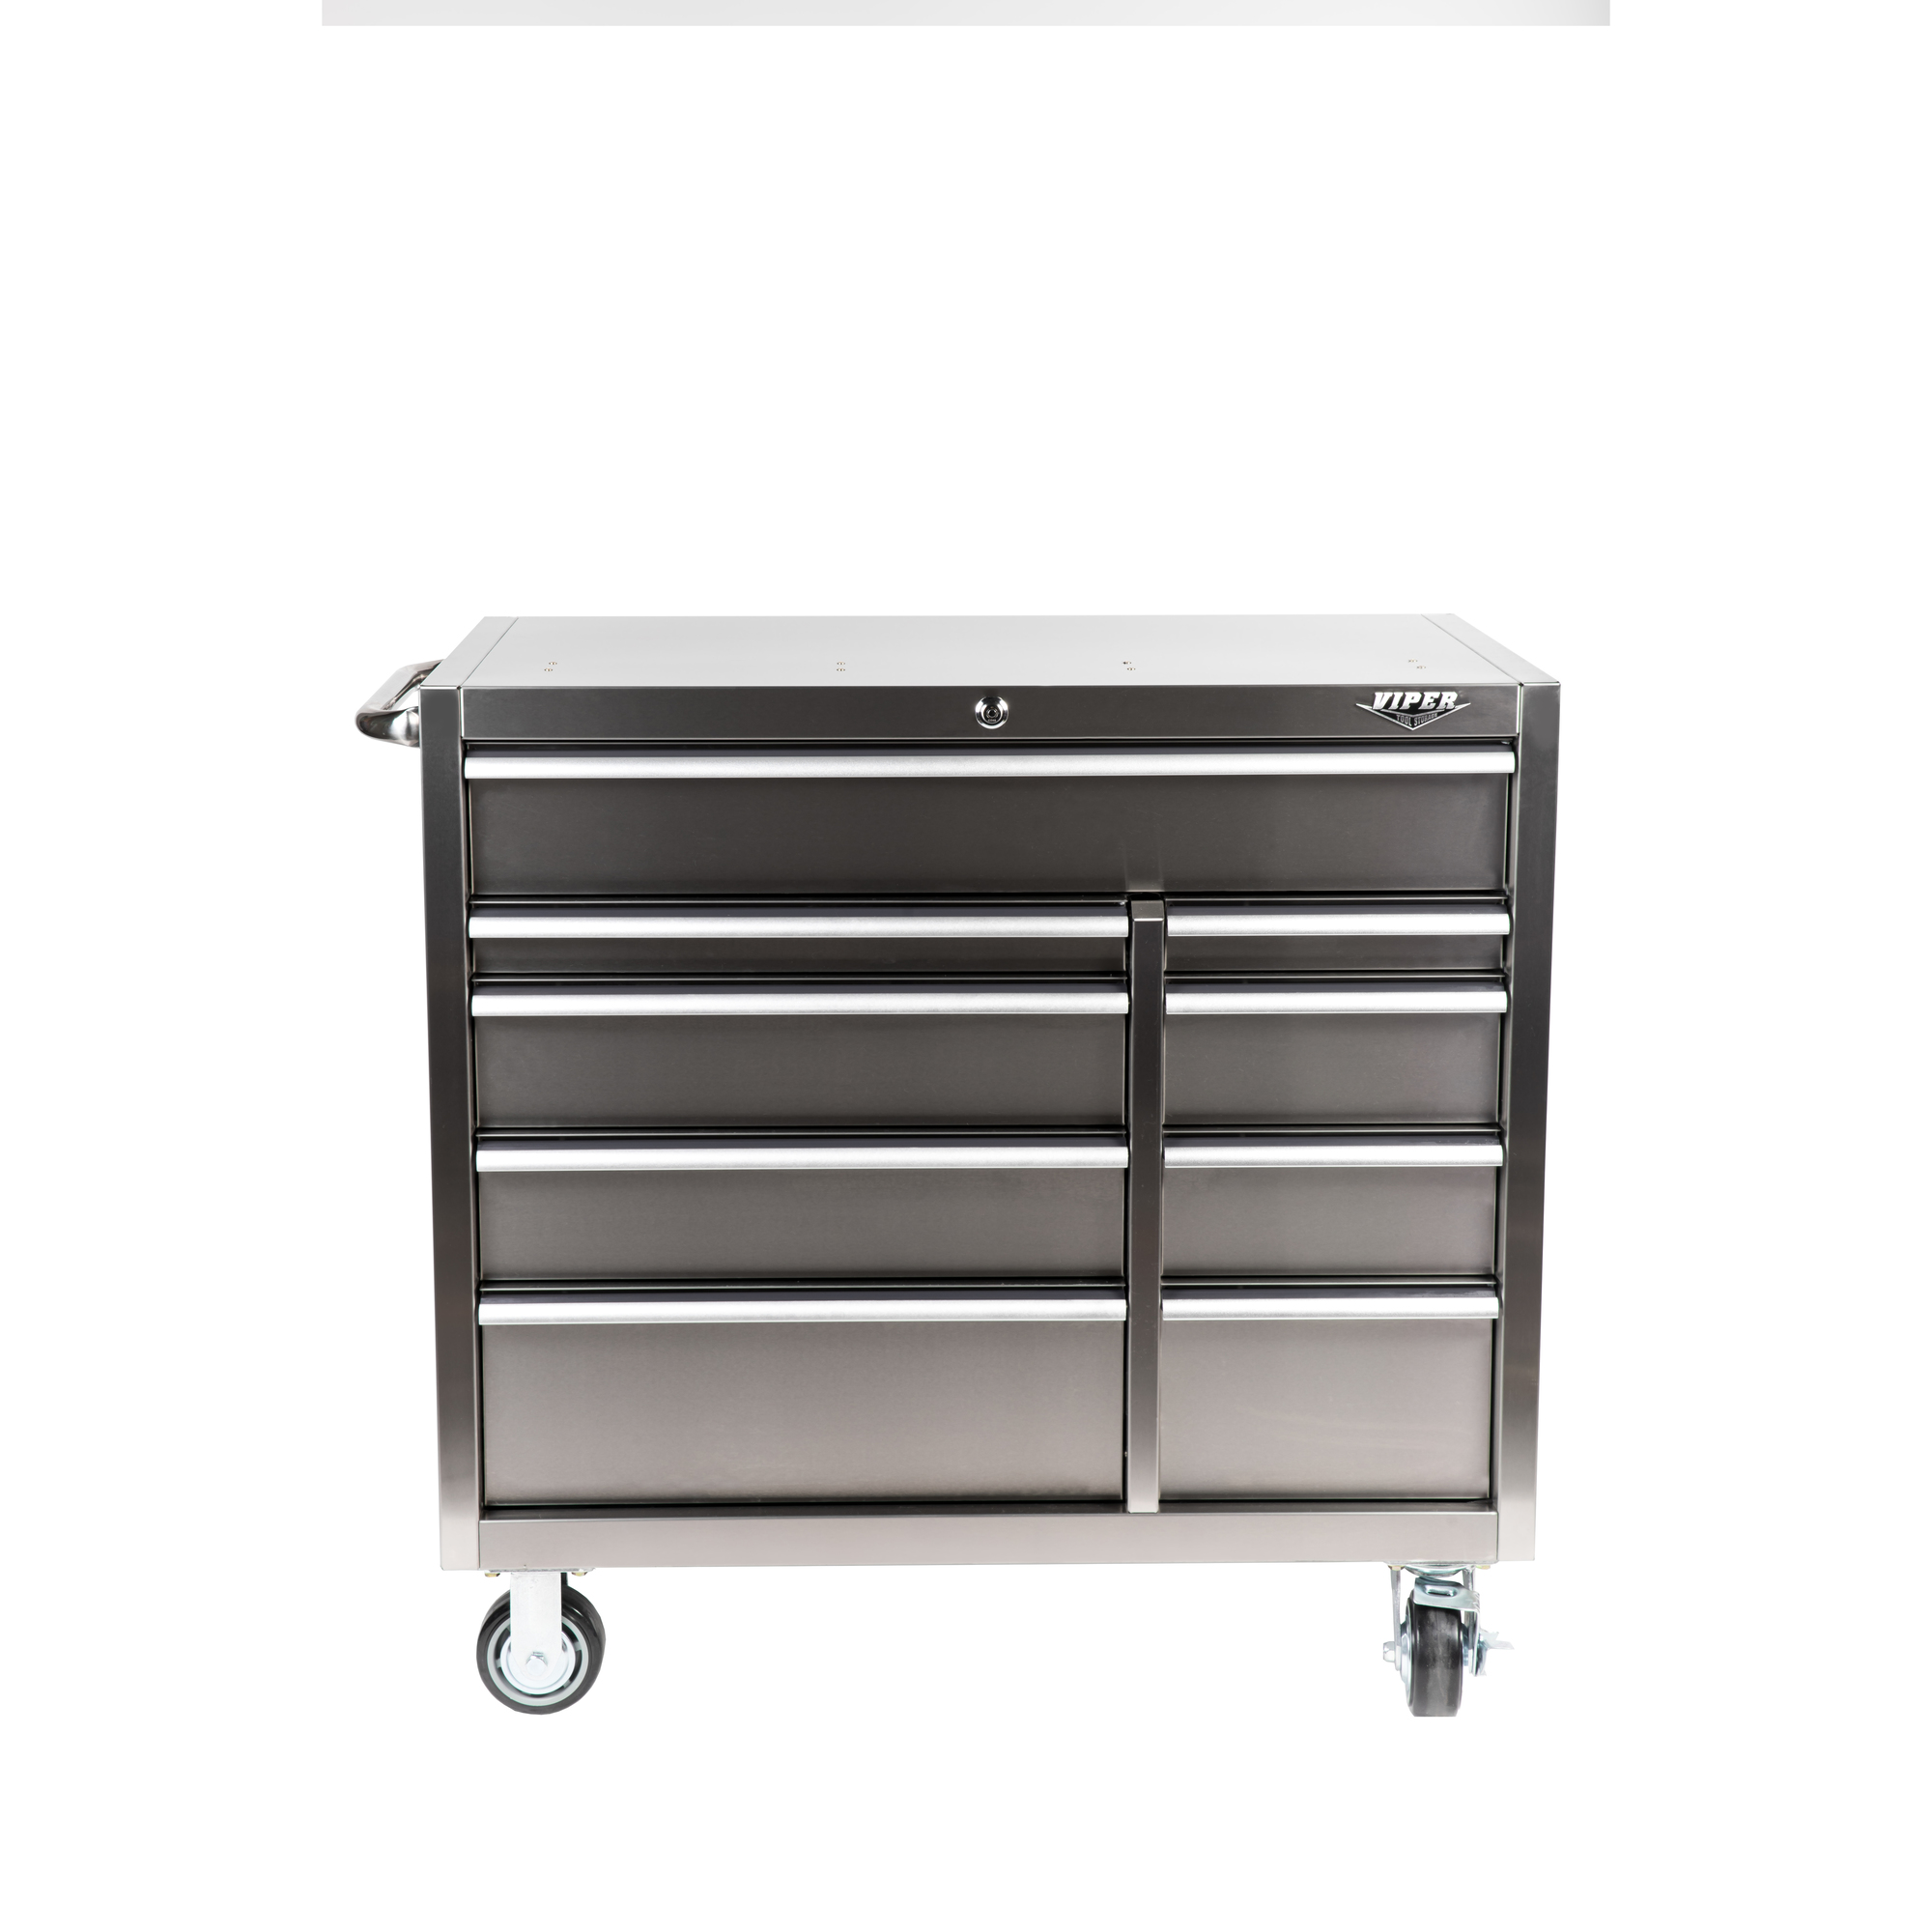 Viper Tool Storage, 9-Drawer Stainless Steel Rolling Cabinet, Width 41.5 in, Height 40.75 in, Color Stainless Steel, Model V412409SSR